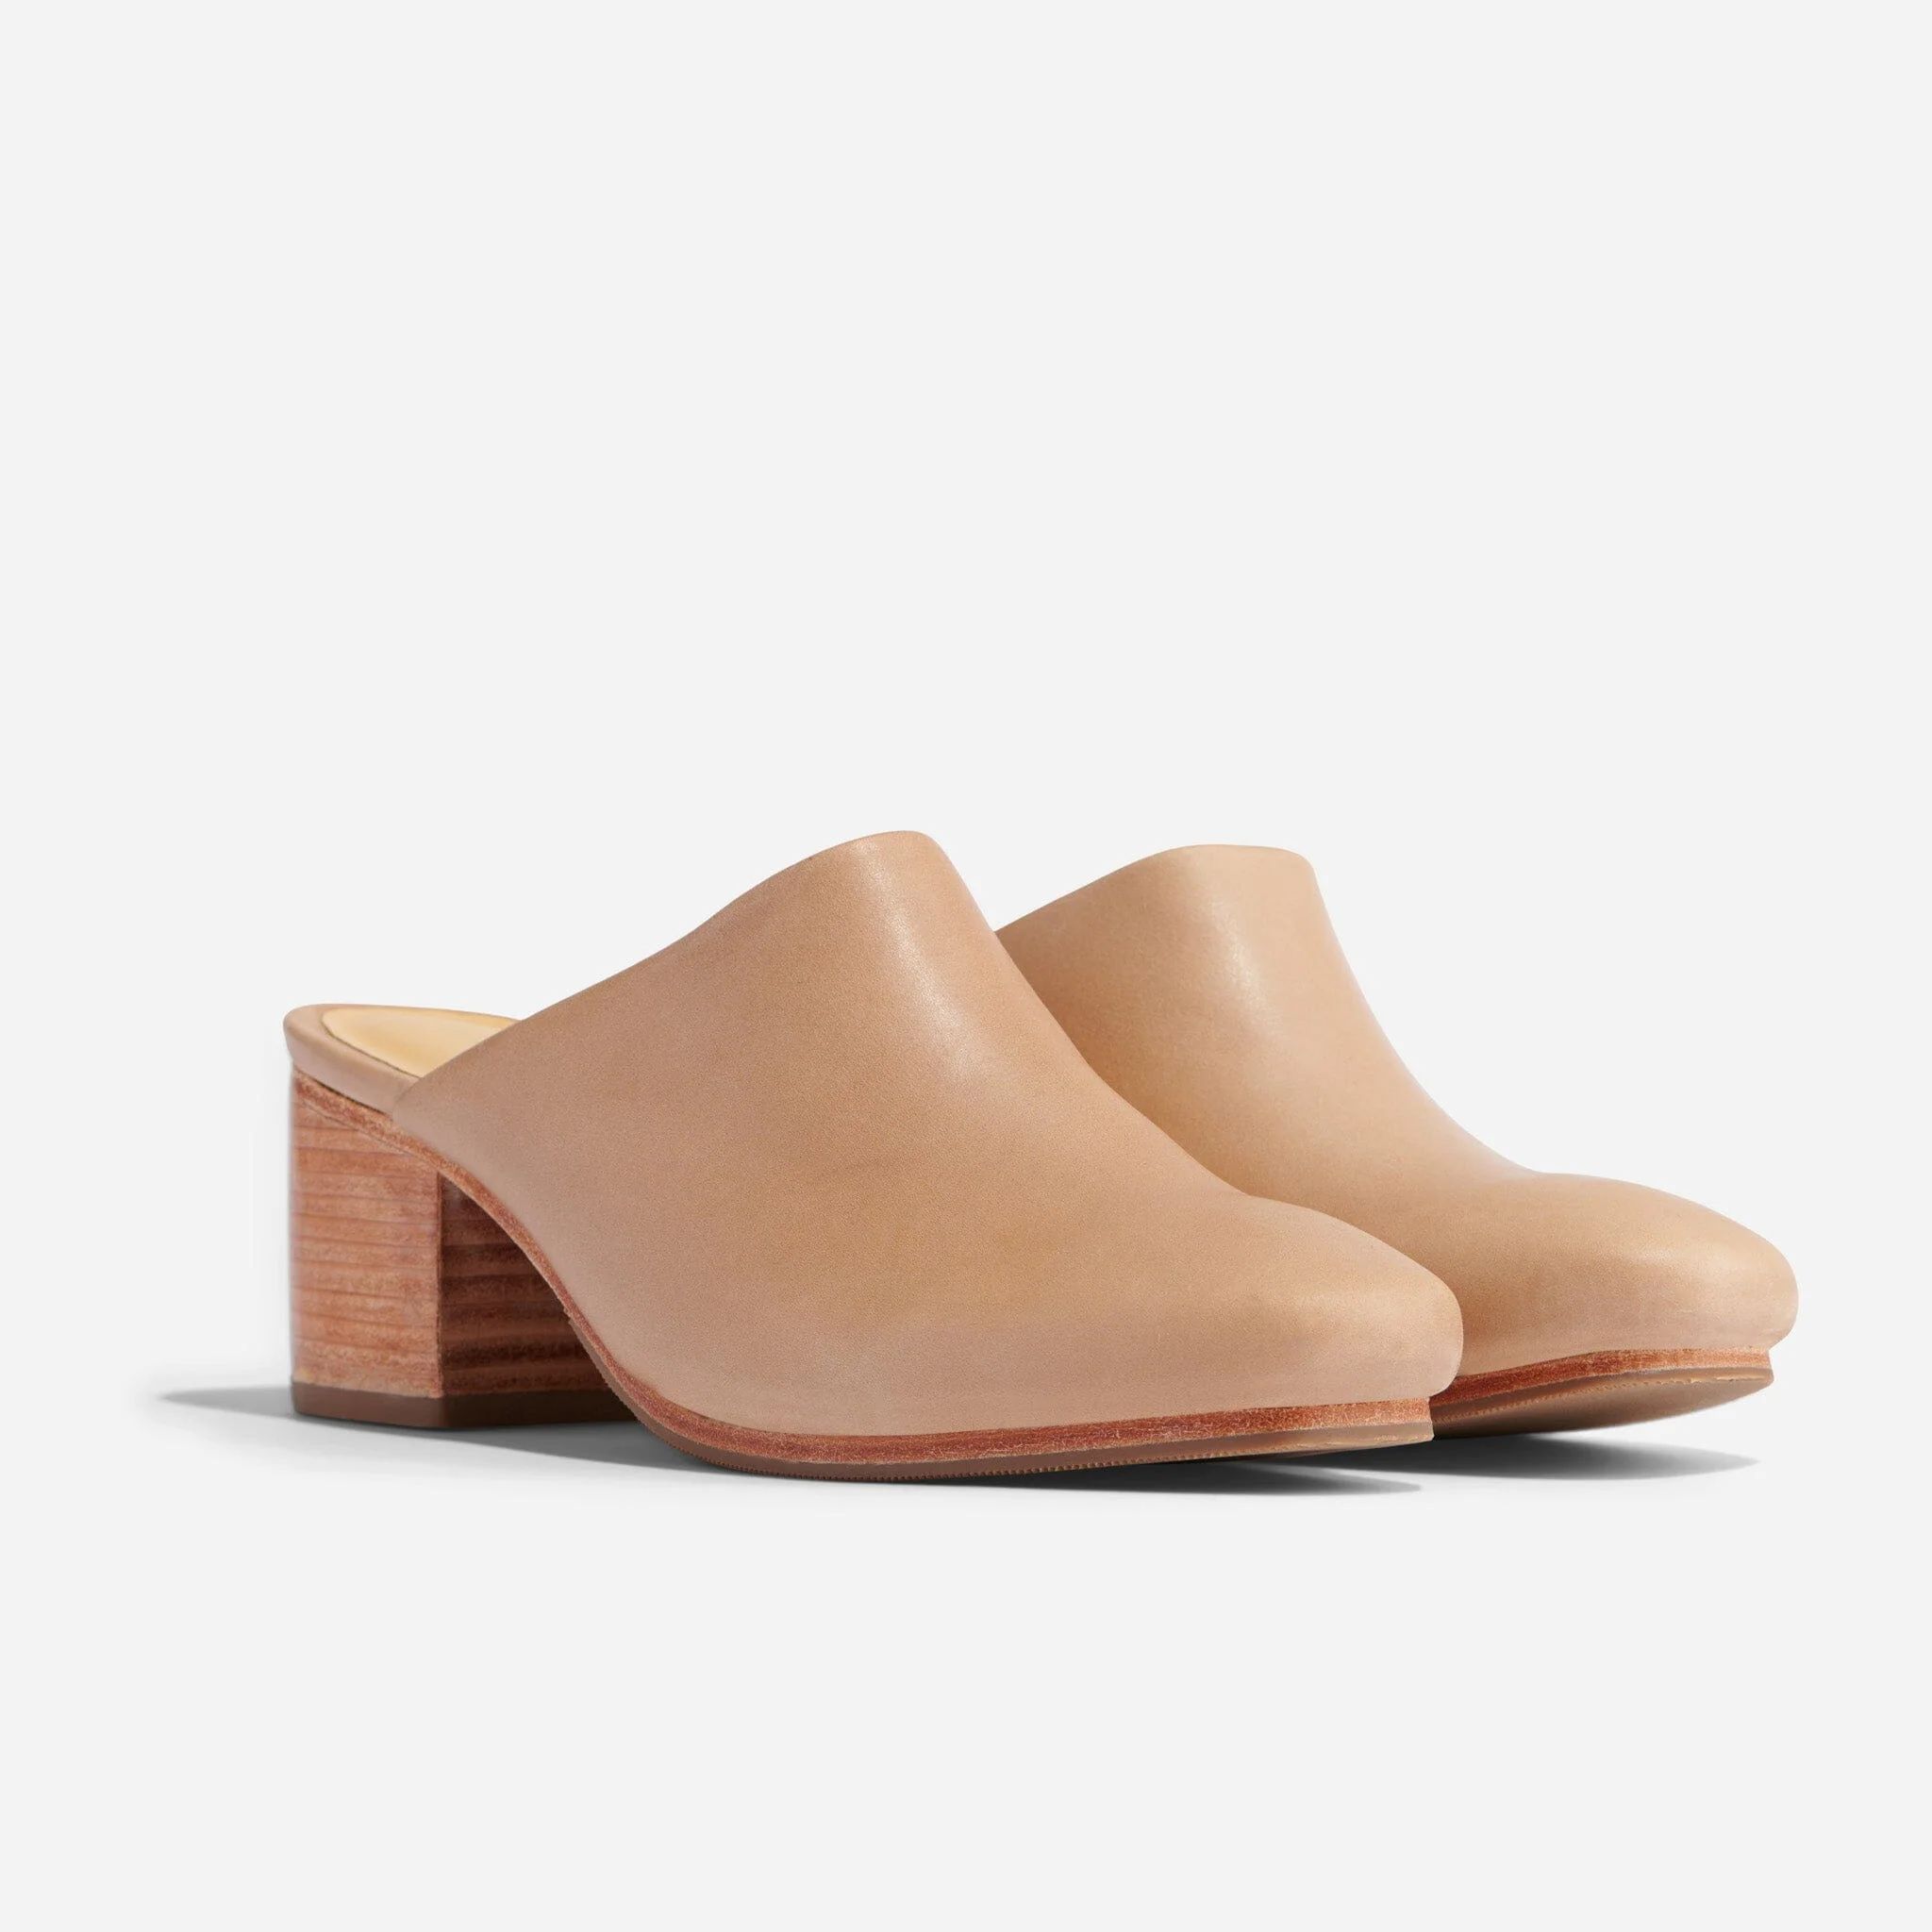 All-Day Heeled Mule | Nisolo